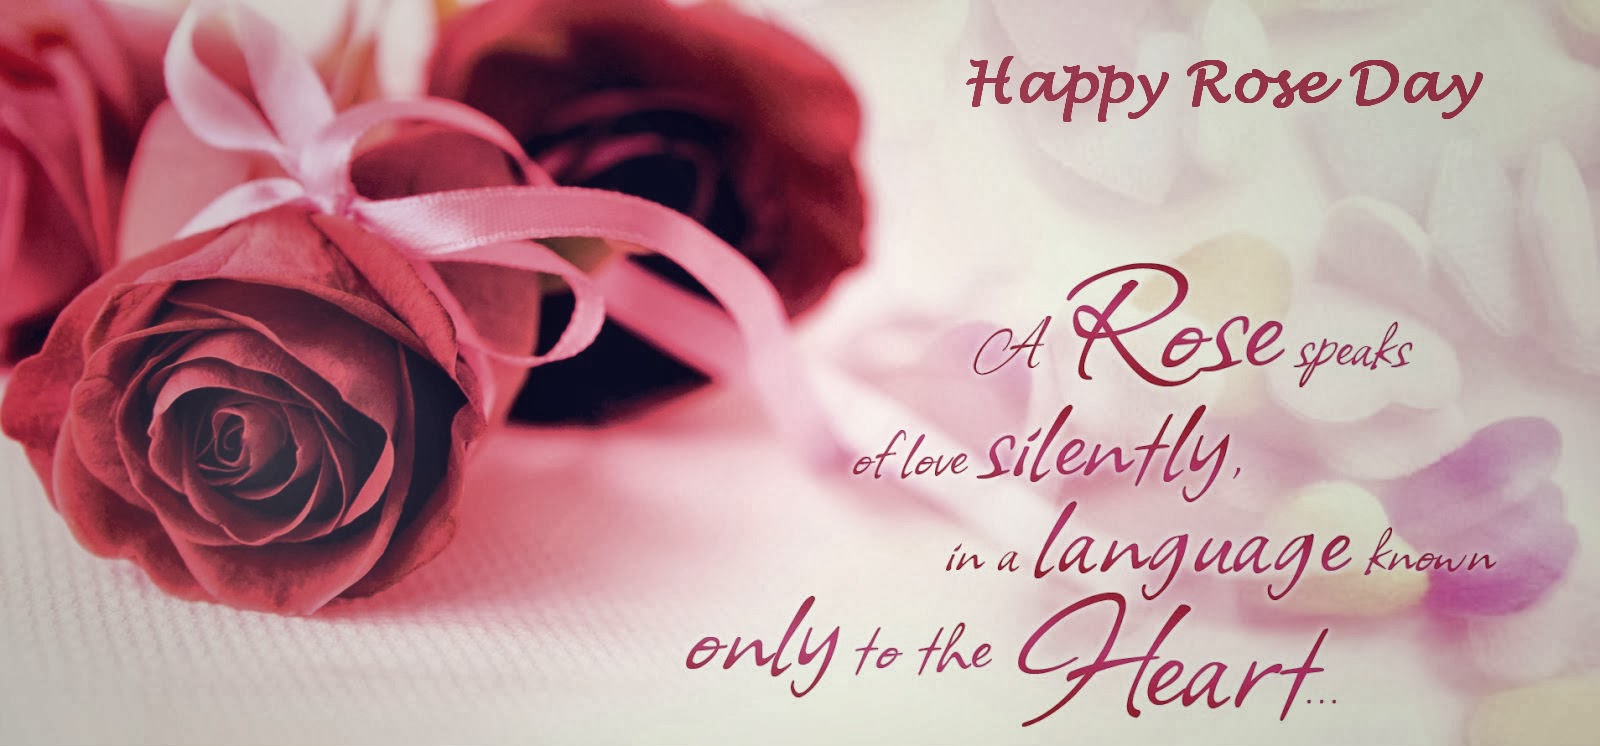 rose day images with quotes